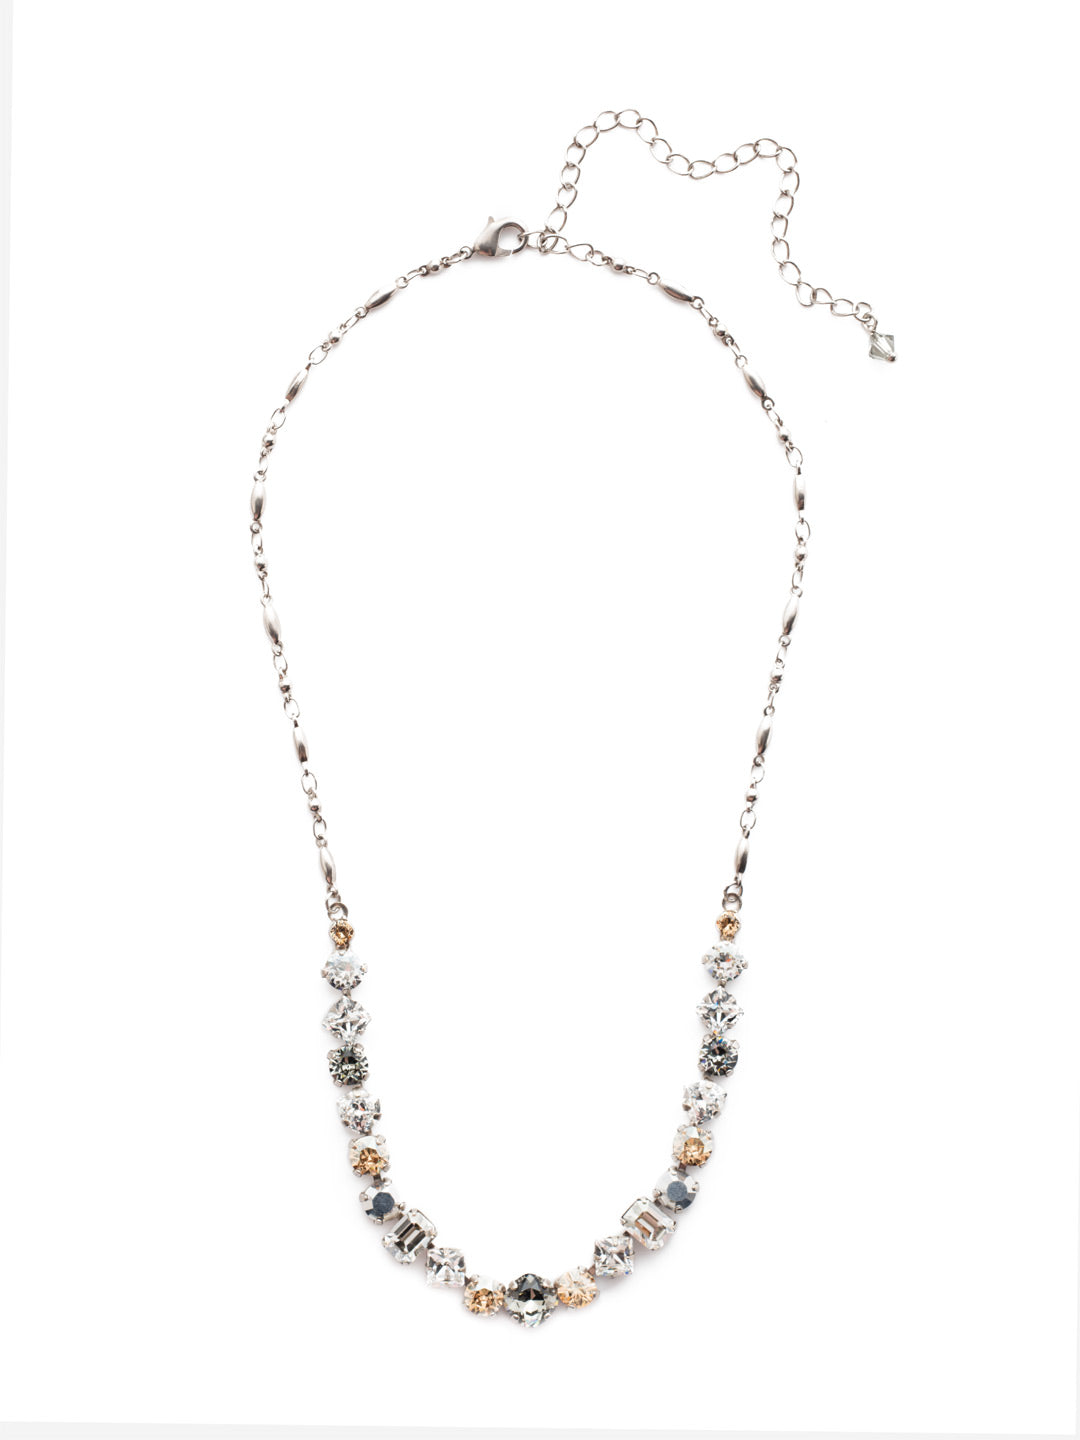 Papaver Tennis Necklace - NDX14ASGNS - This classic half line crystal necklace features an assortment of geometric shapes finished with a delicate metal chain. From Sorrelli's Golden Shadow collection in our Antique Silver-tone finish.